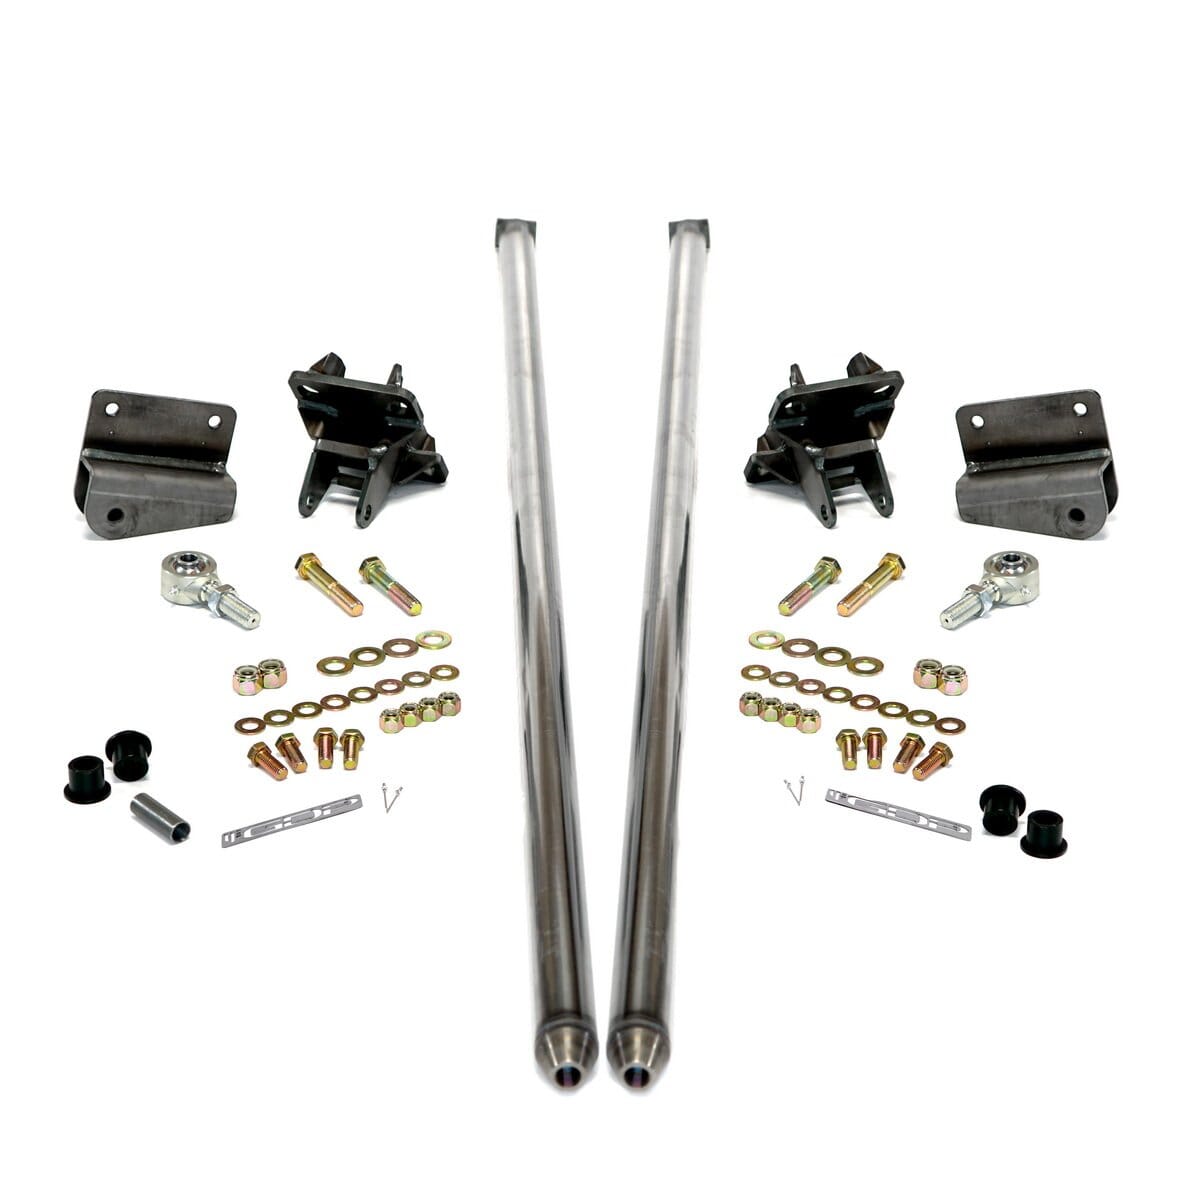 70" Bolt-on Traction Bars 3.5" Axle Diameter (2001-2010 6.6L Duramax) Traction Bars GDP Raw 